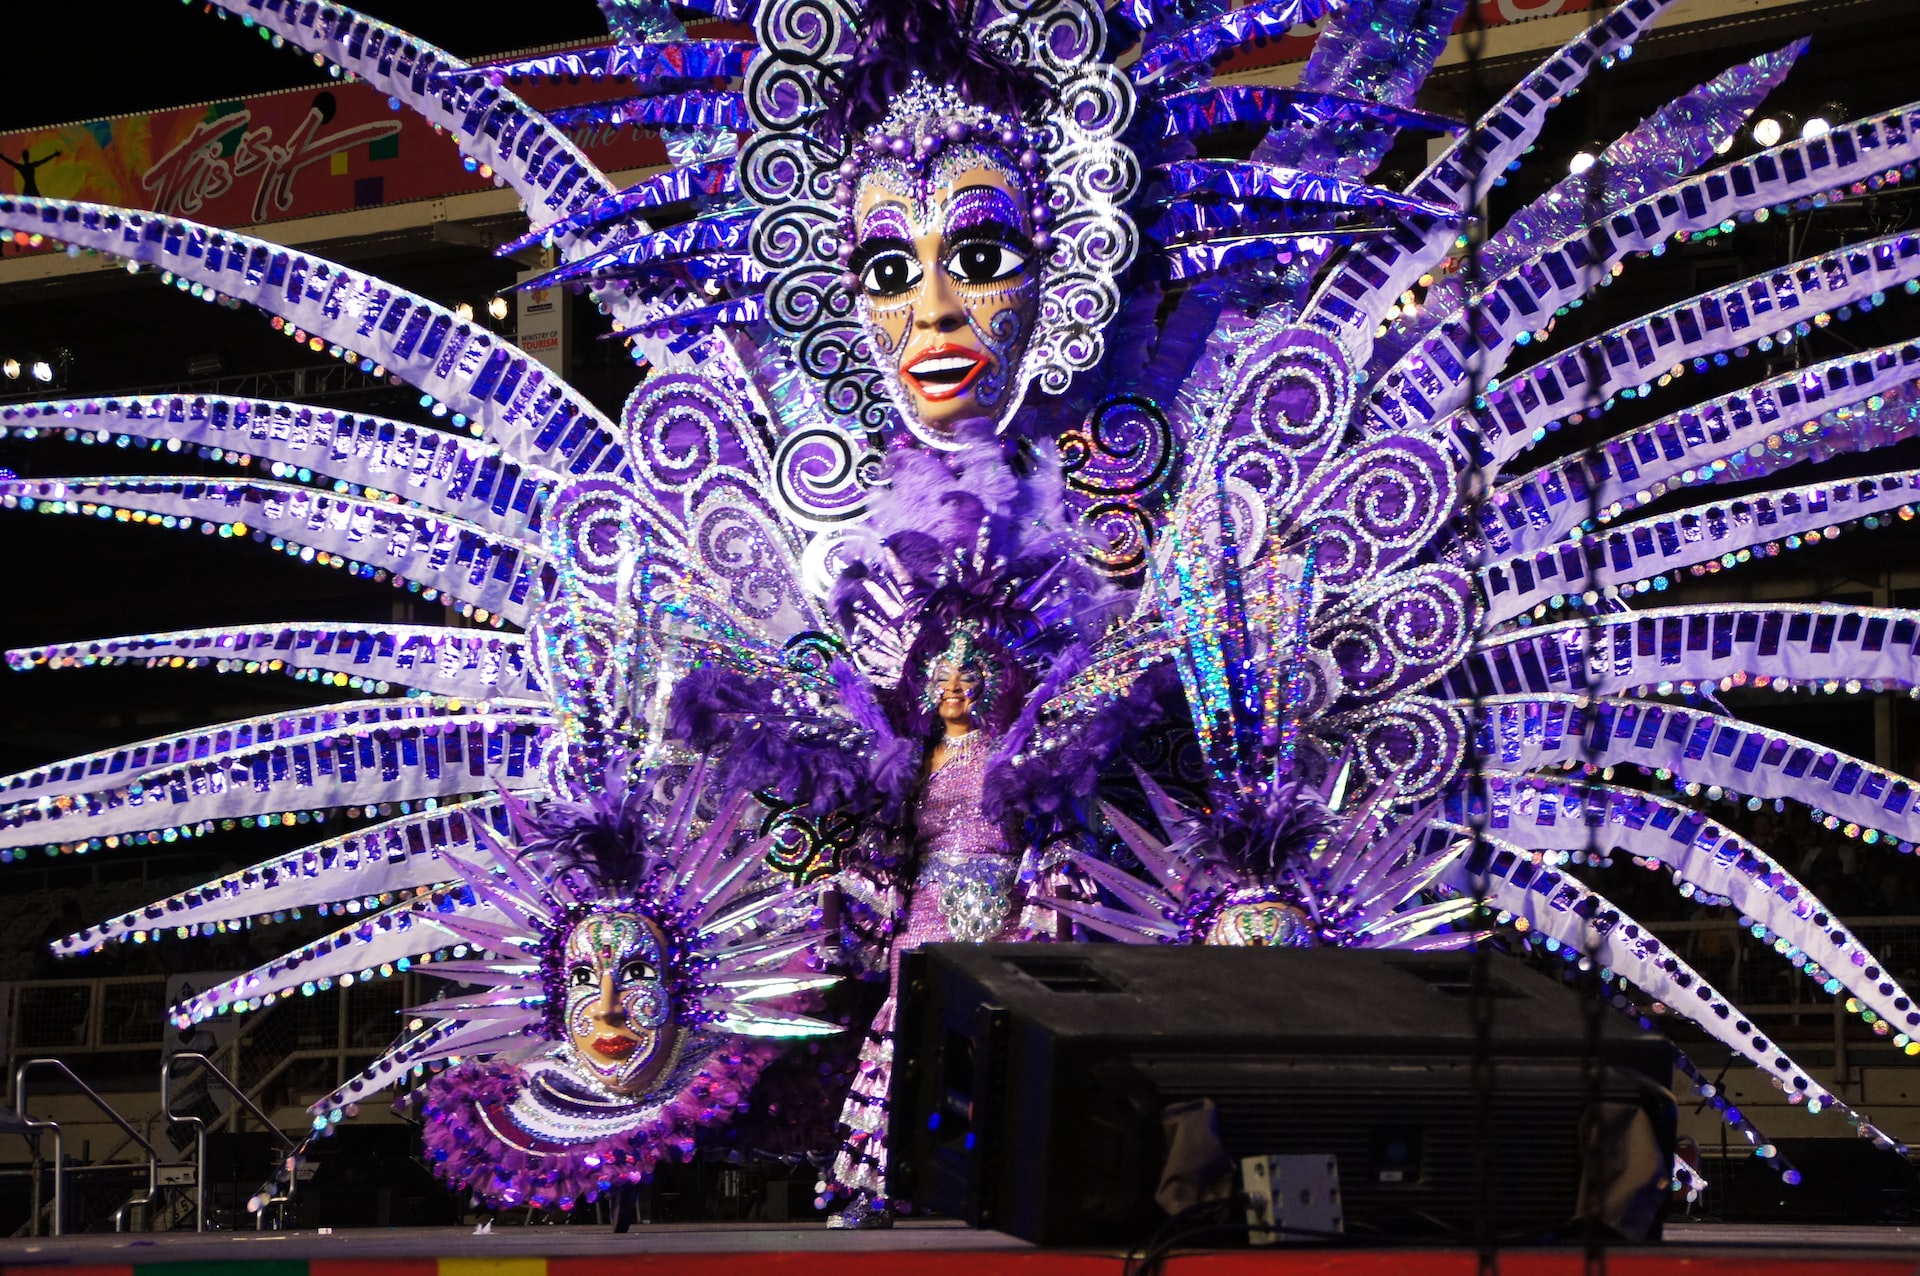 A woman on stage wearing a large, elaborate purple outfit akin to a peacock.